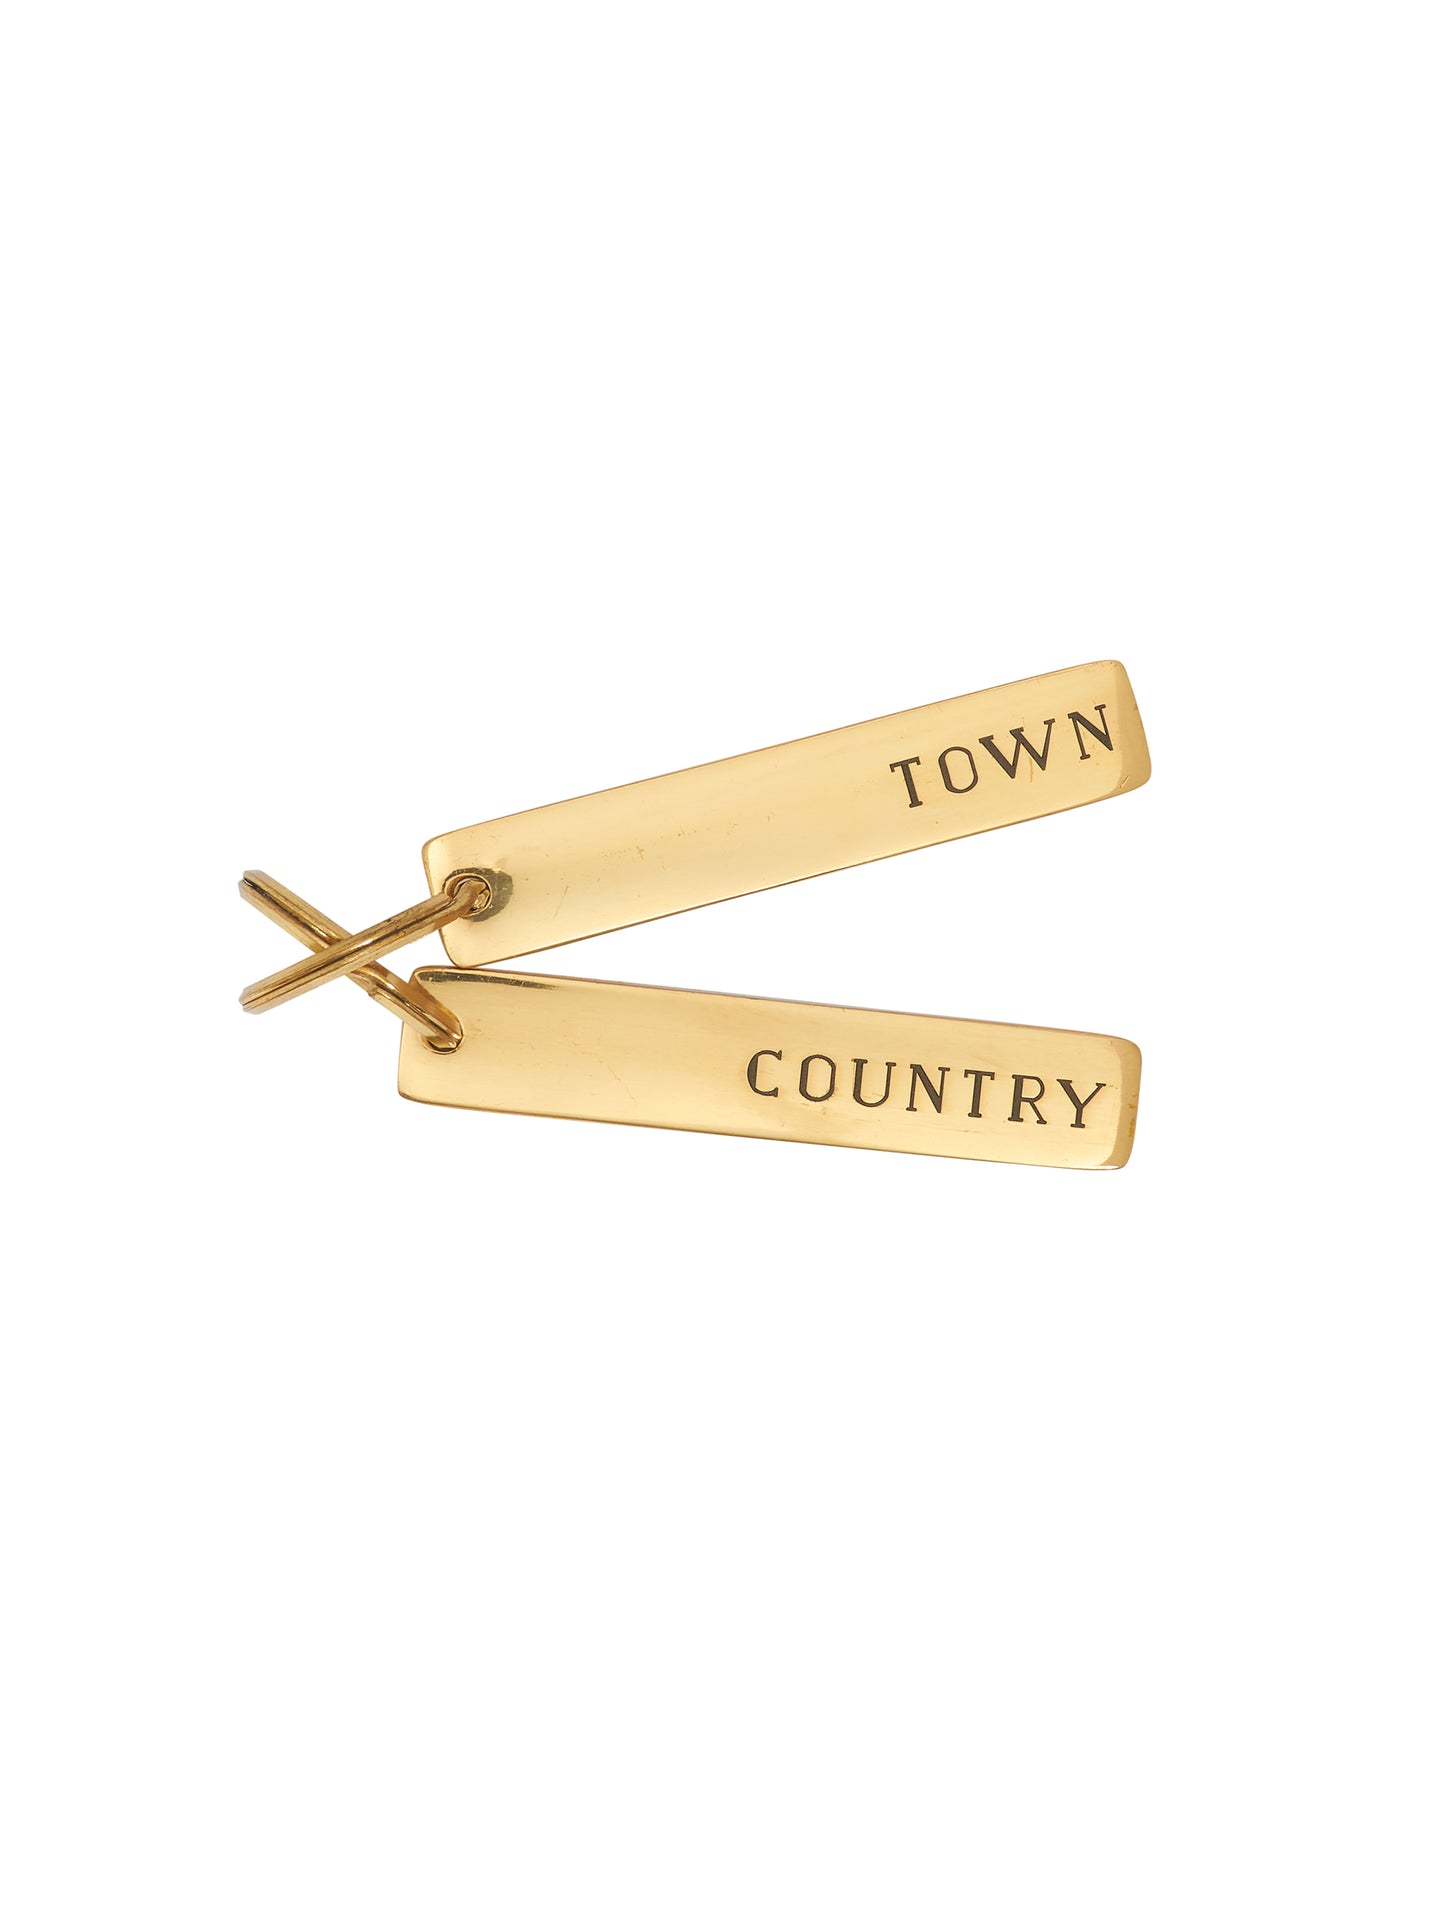 Town and Country Key Chain Pair Weston Table